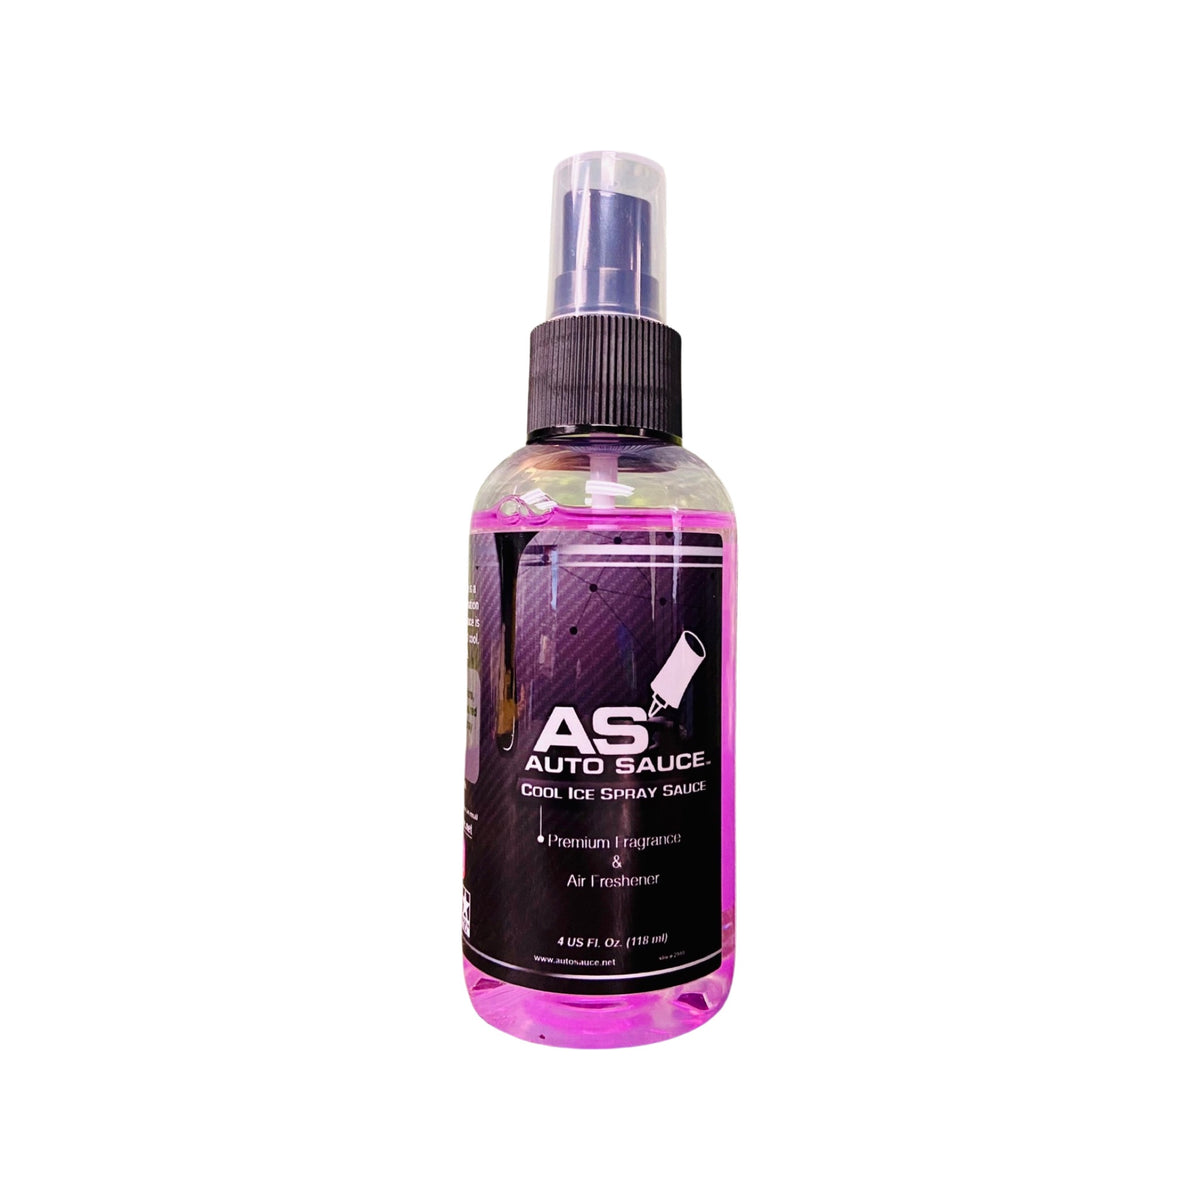 Cool Ice Spray Sauce – AUTO SAUCE DETAILING PRODUCTS